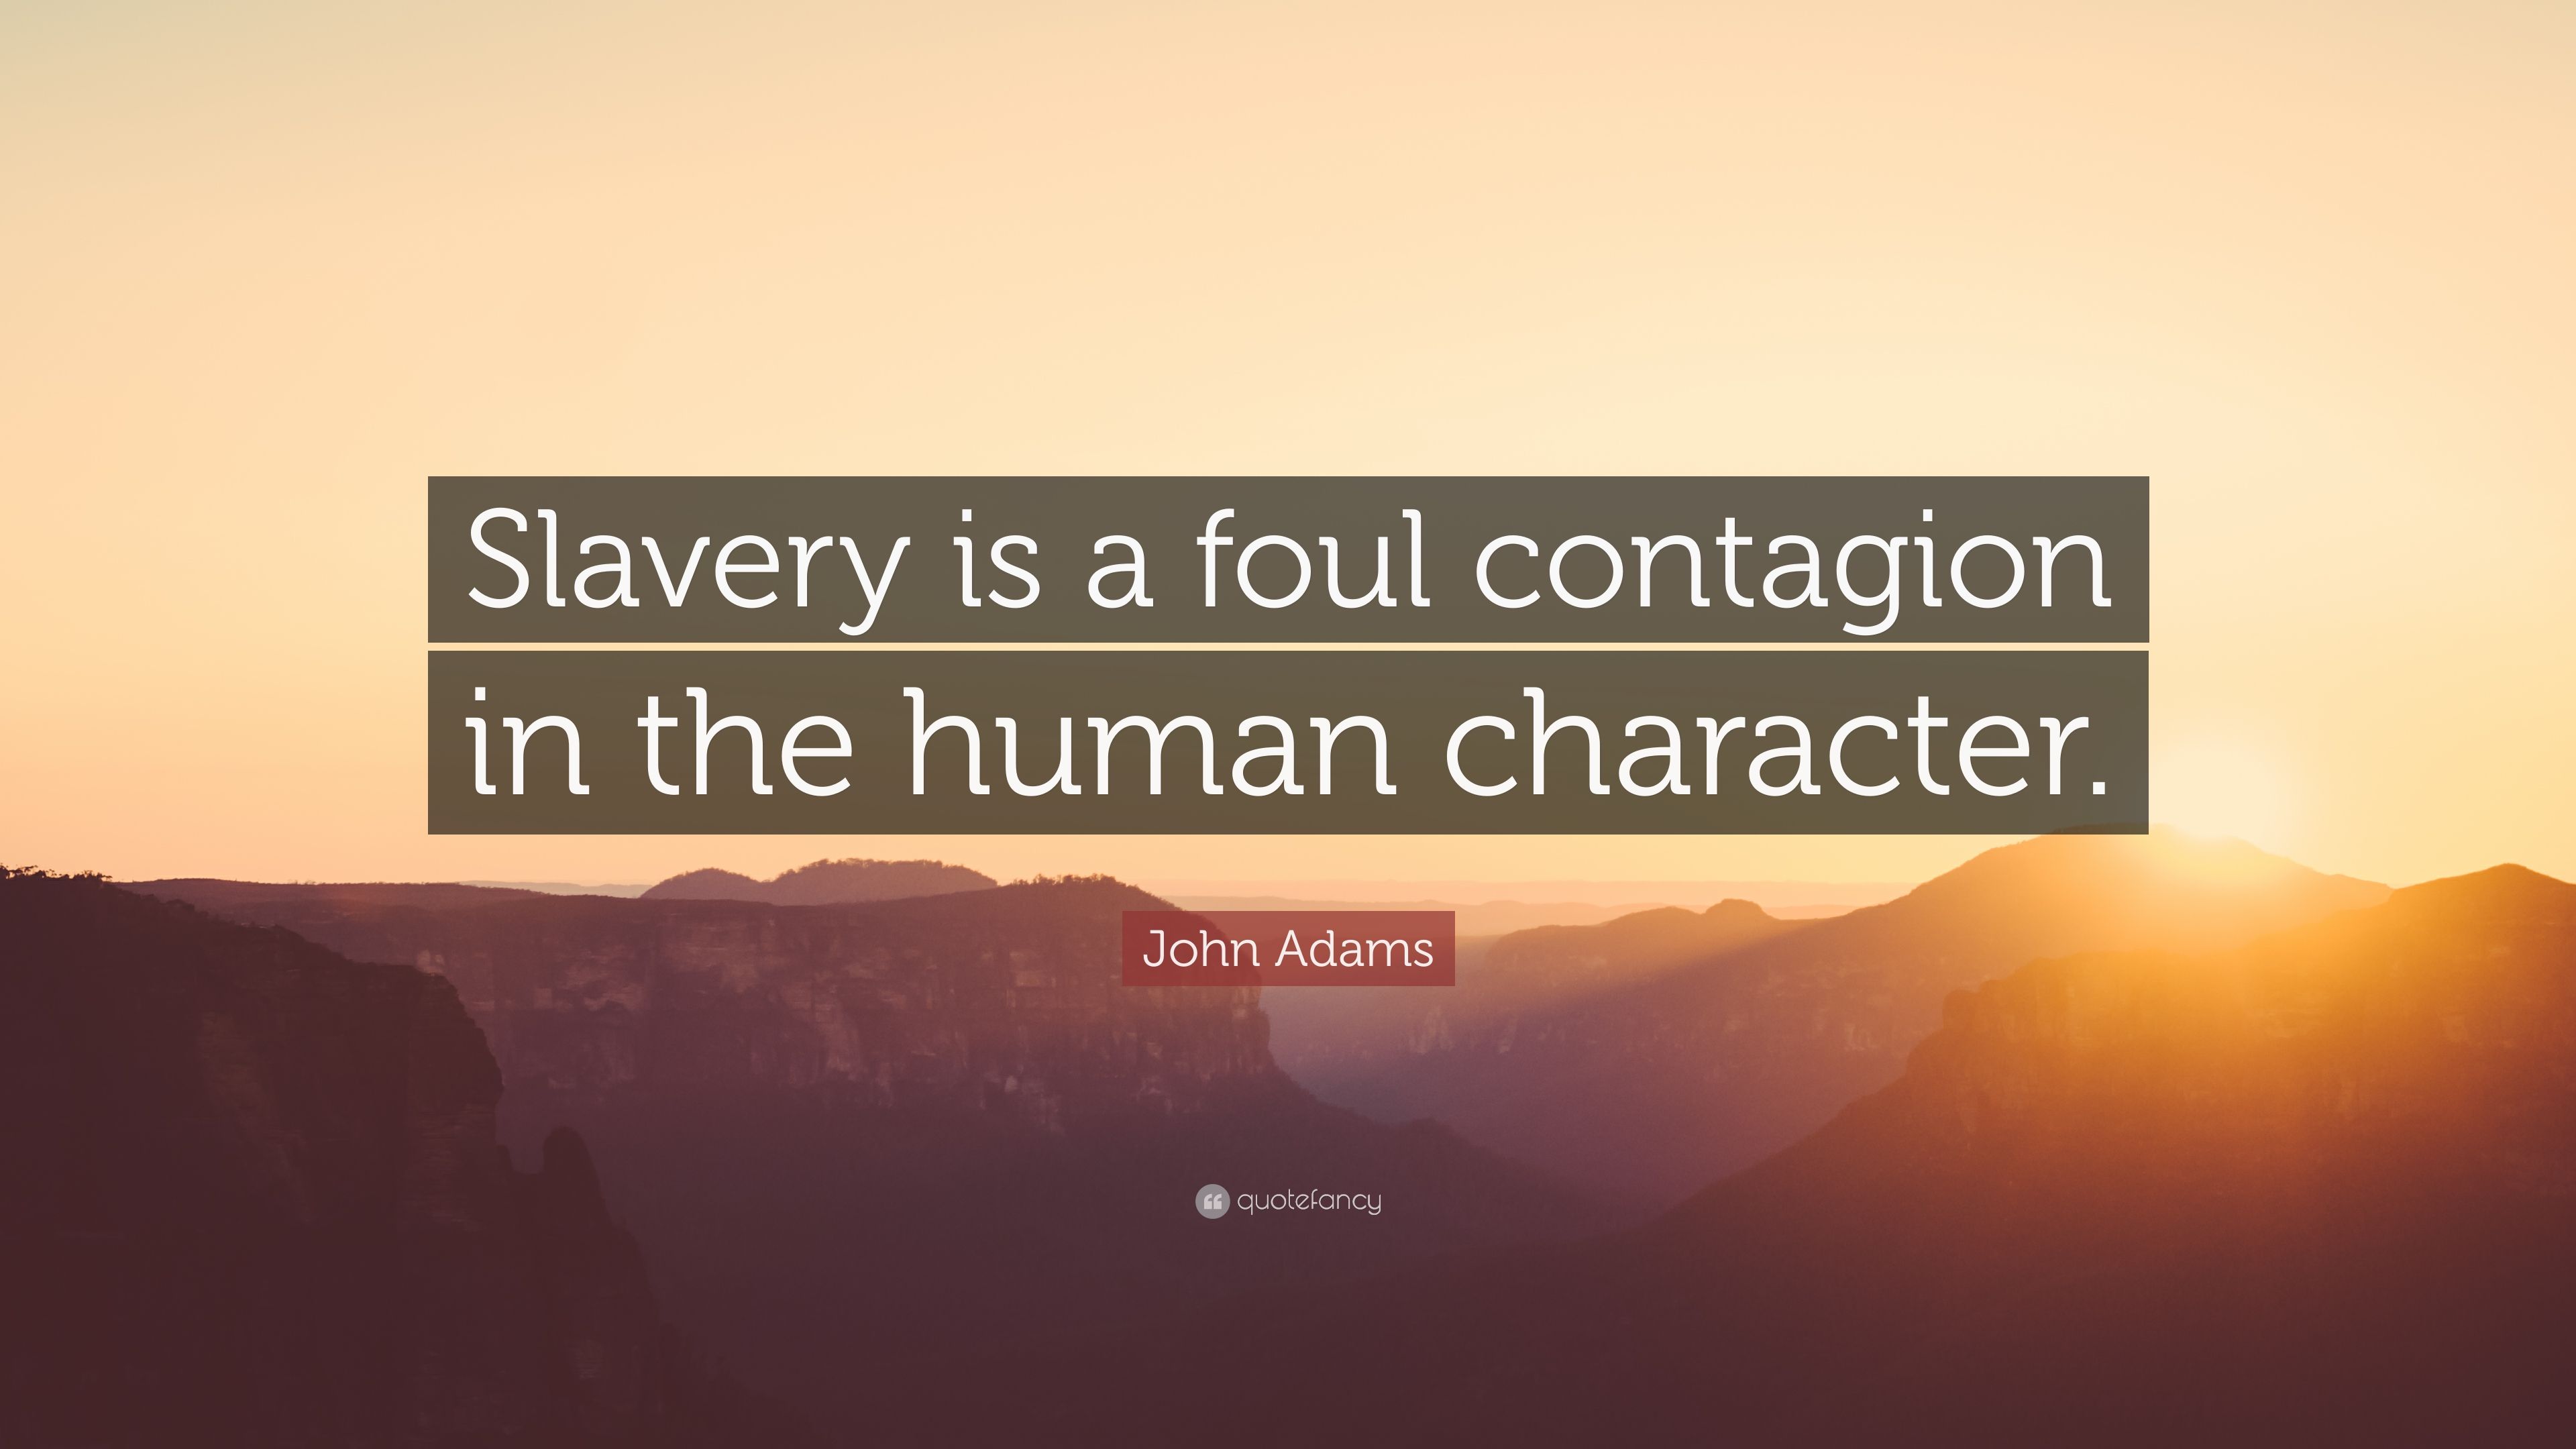 John Adams Quote: “Slavery is a foul .quotefancy.com